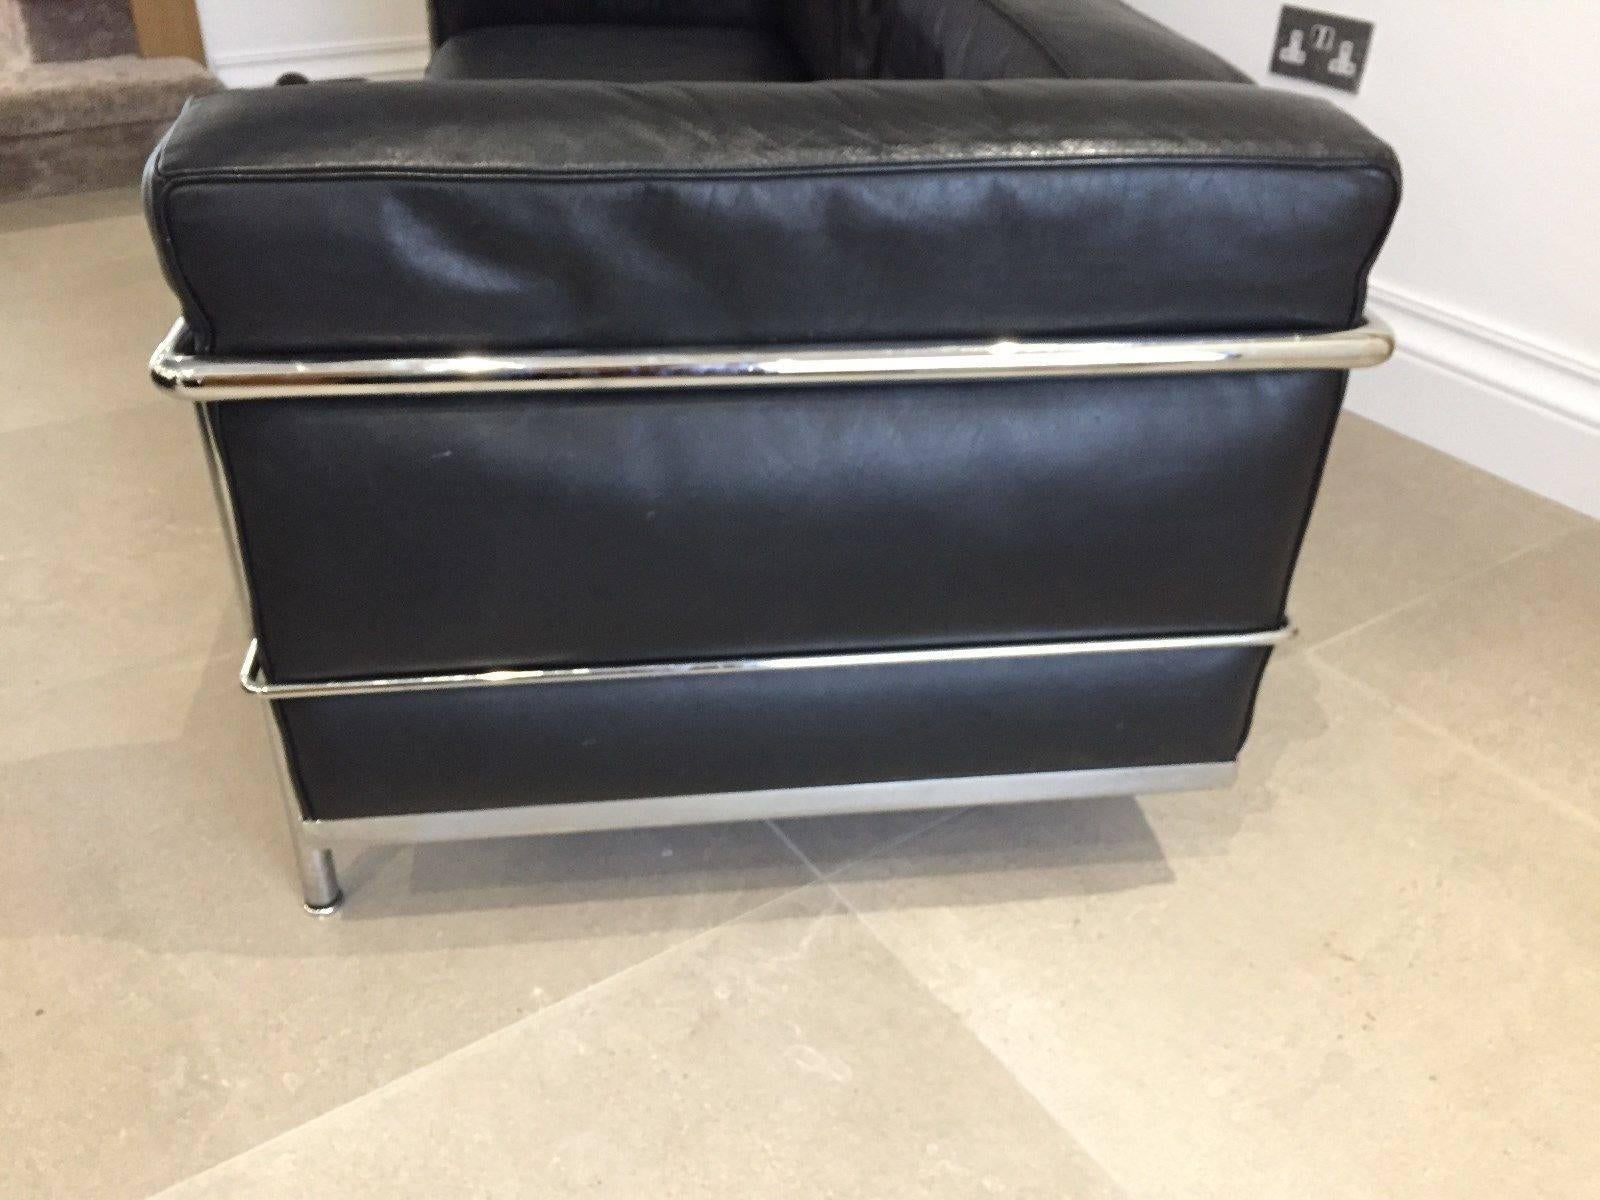 Iconic rare designer original Cassina LC3 Le Corbusier vintage leather sofa 
Two-seat black leather
to purchase today would cost £7500
in very good condition generally
few aged related minor marks
well looked after.

 